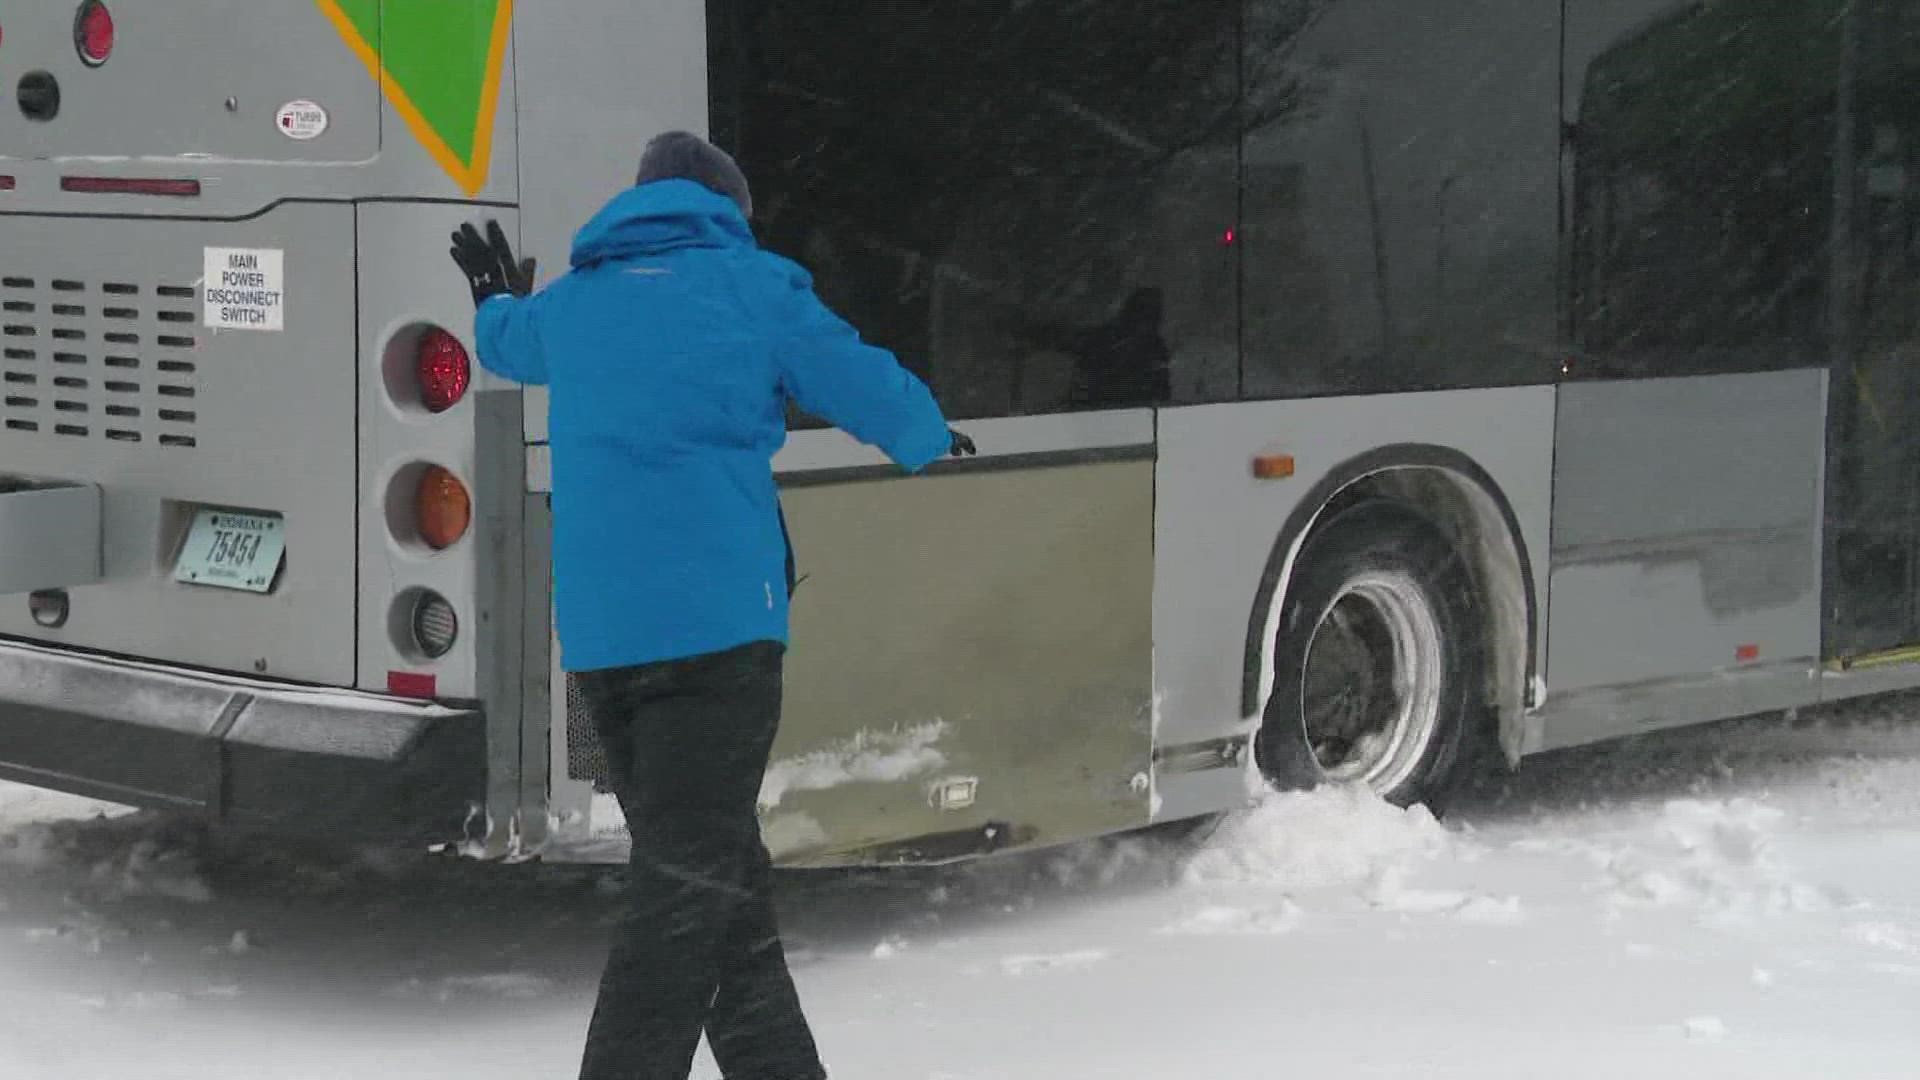 WTHR weatherman Sean Ash helped out a stuck IndyGo bus, stranded during the winter snow storm!